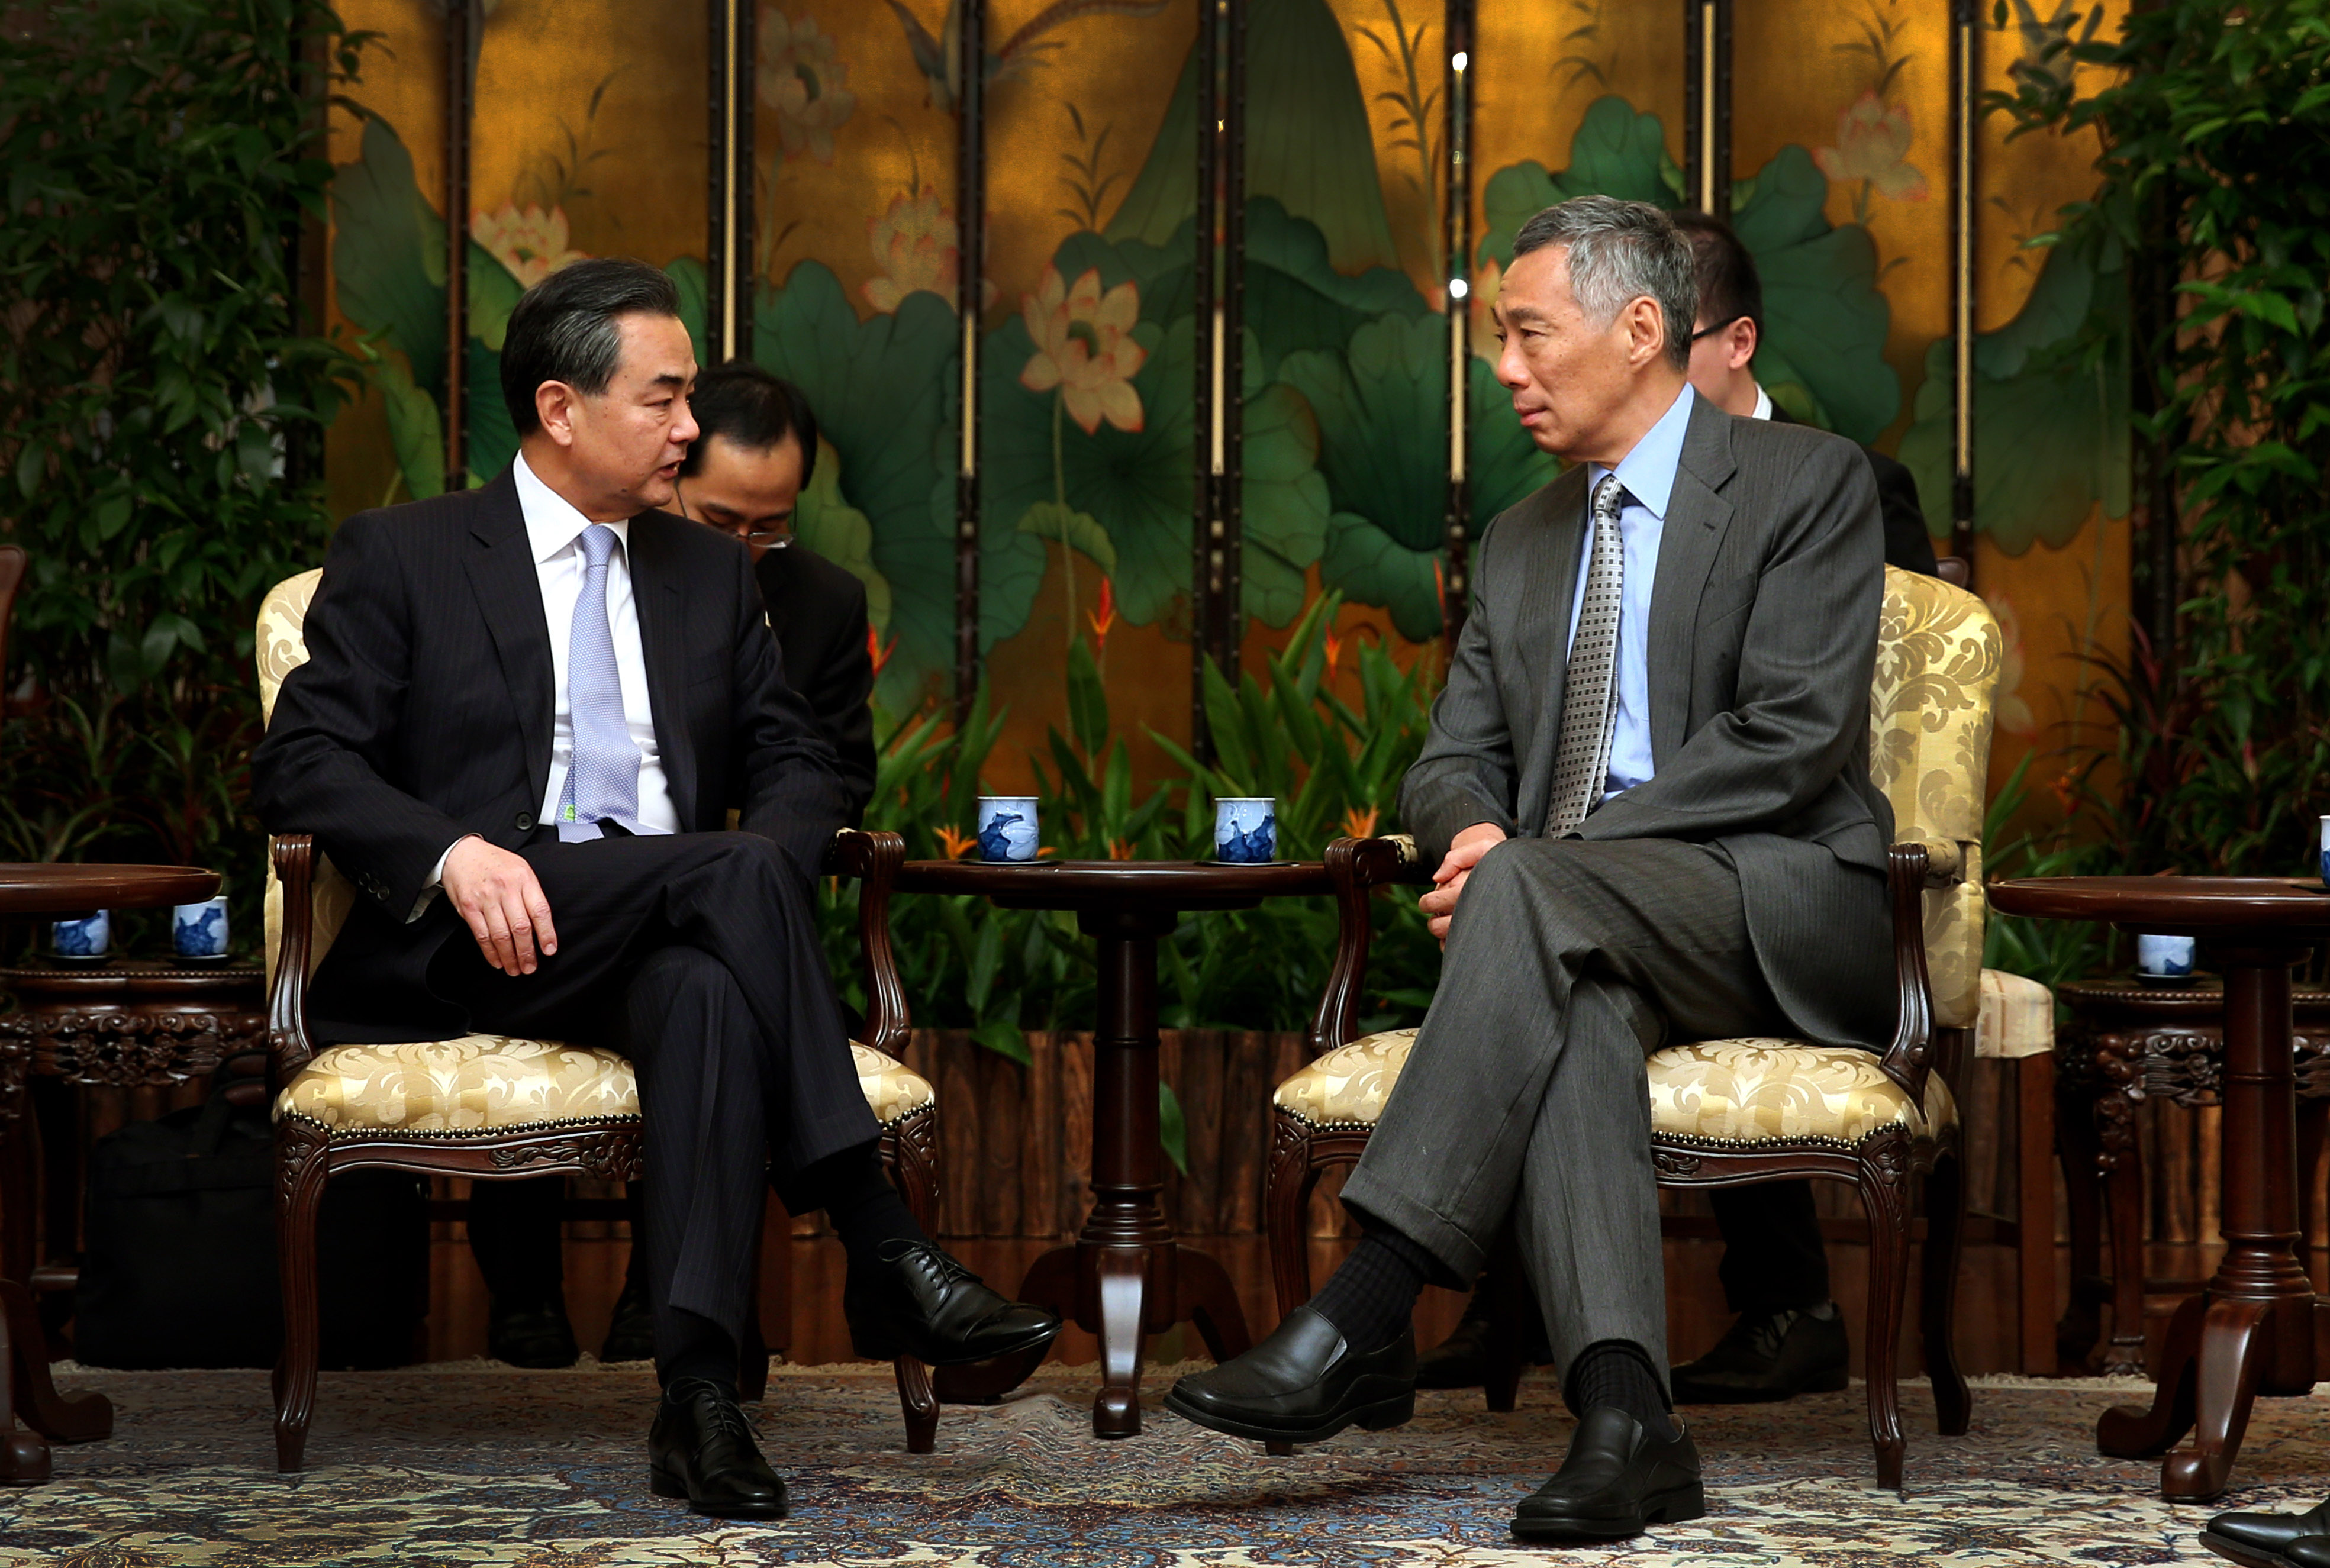 Call by Chinese Foreign Minister Wang Yi on Prime Minister Lee Hsien Loong on 3 Aug 2015 (MCI Photo by Terence Tan)